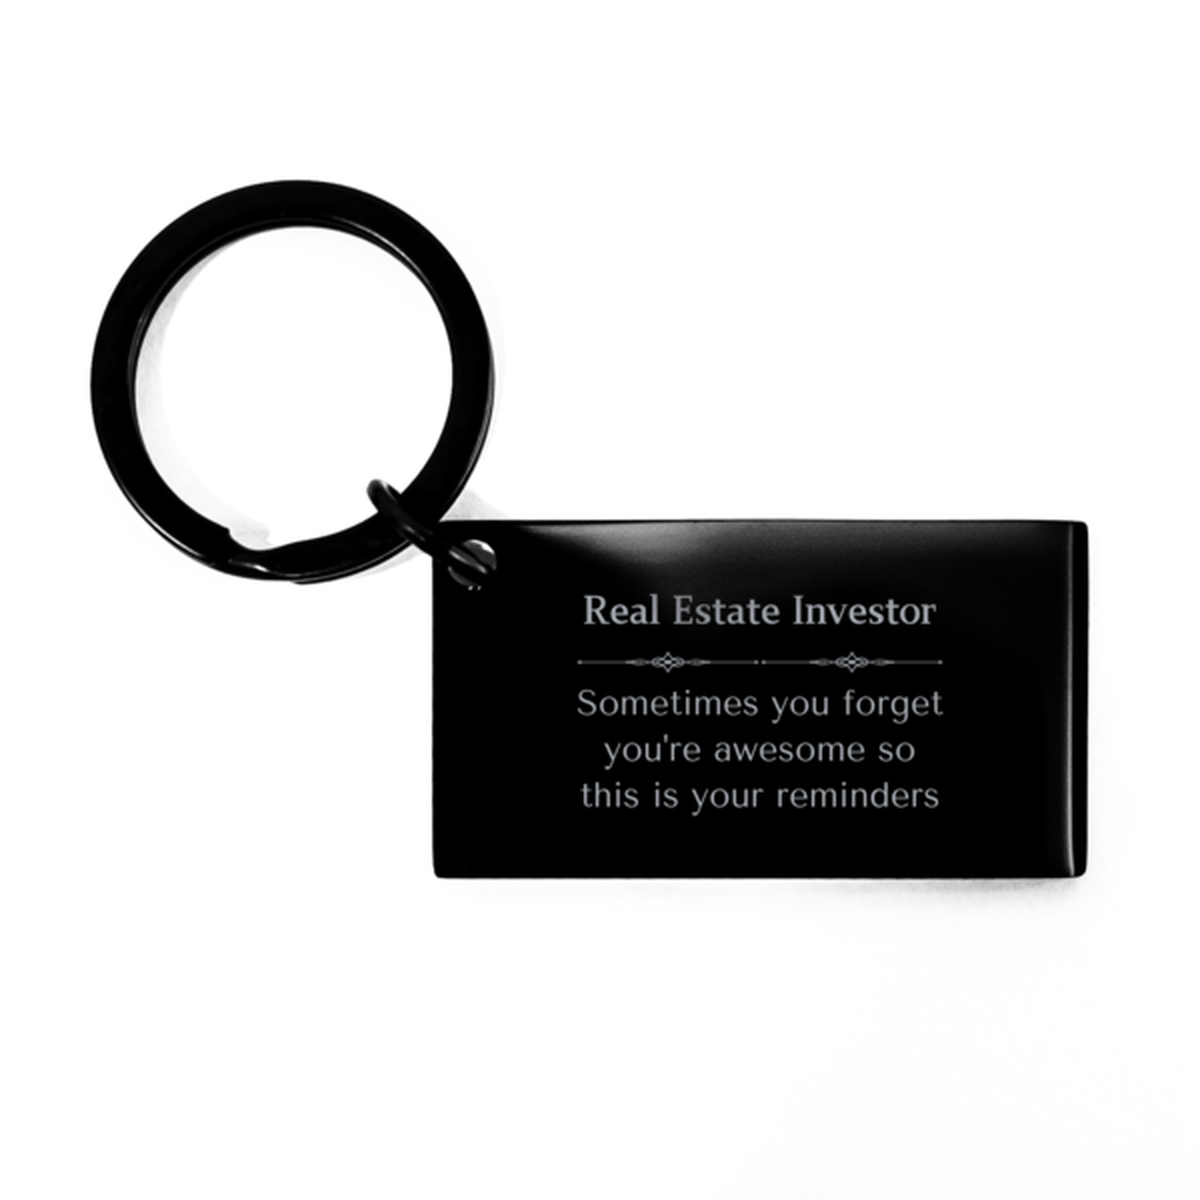 Sentimental Real Estate Investor Keychain, Tax Preparer Sometimes you forget you're awesome so this is your reminders, Graduation Christmas Birthday Gifts for Real Estate Investor, Men, Women, Coworkers